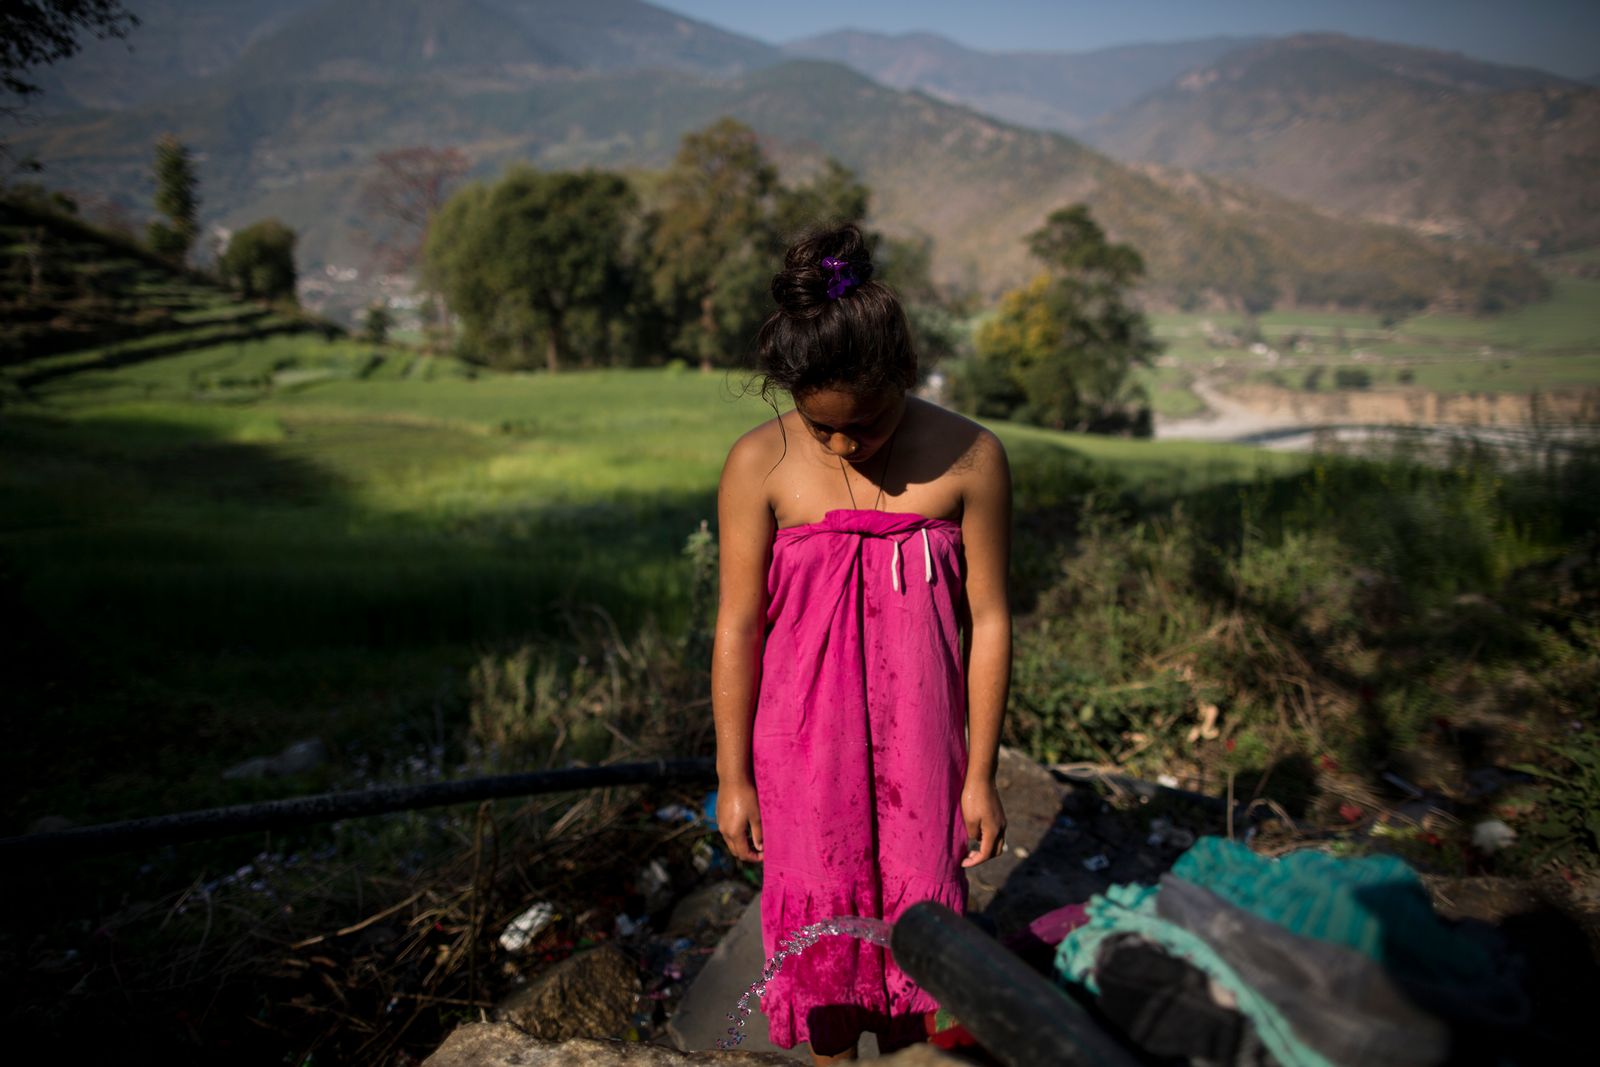 © TaraTW - Image from the Chhaupadi - the outlawed practice still hurting women in Nepal photography project